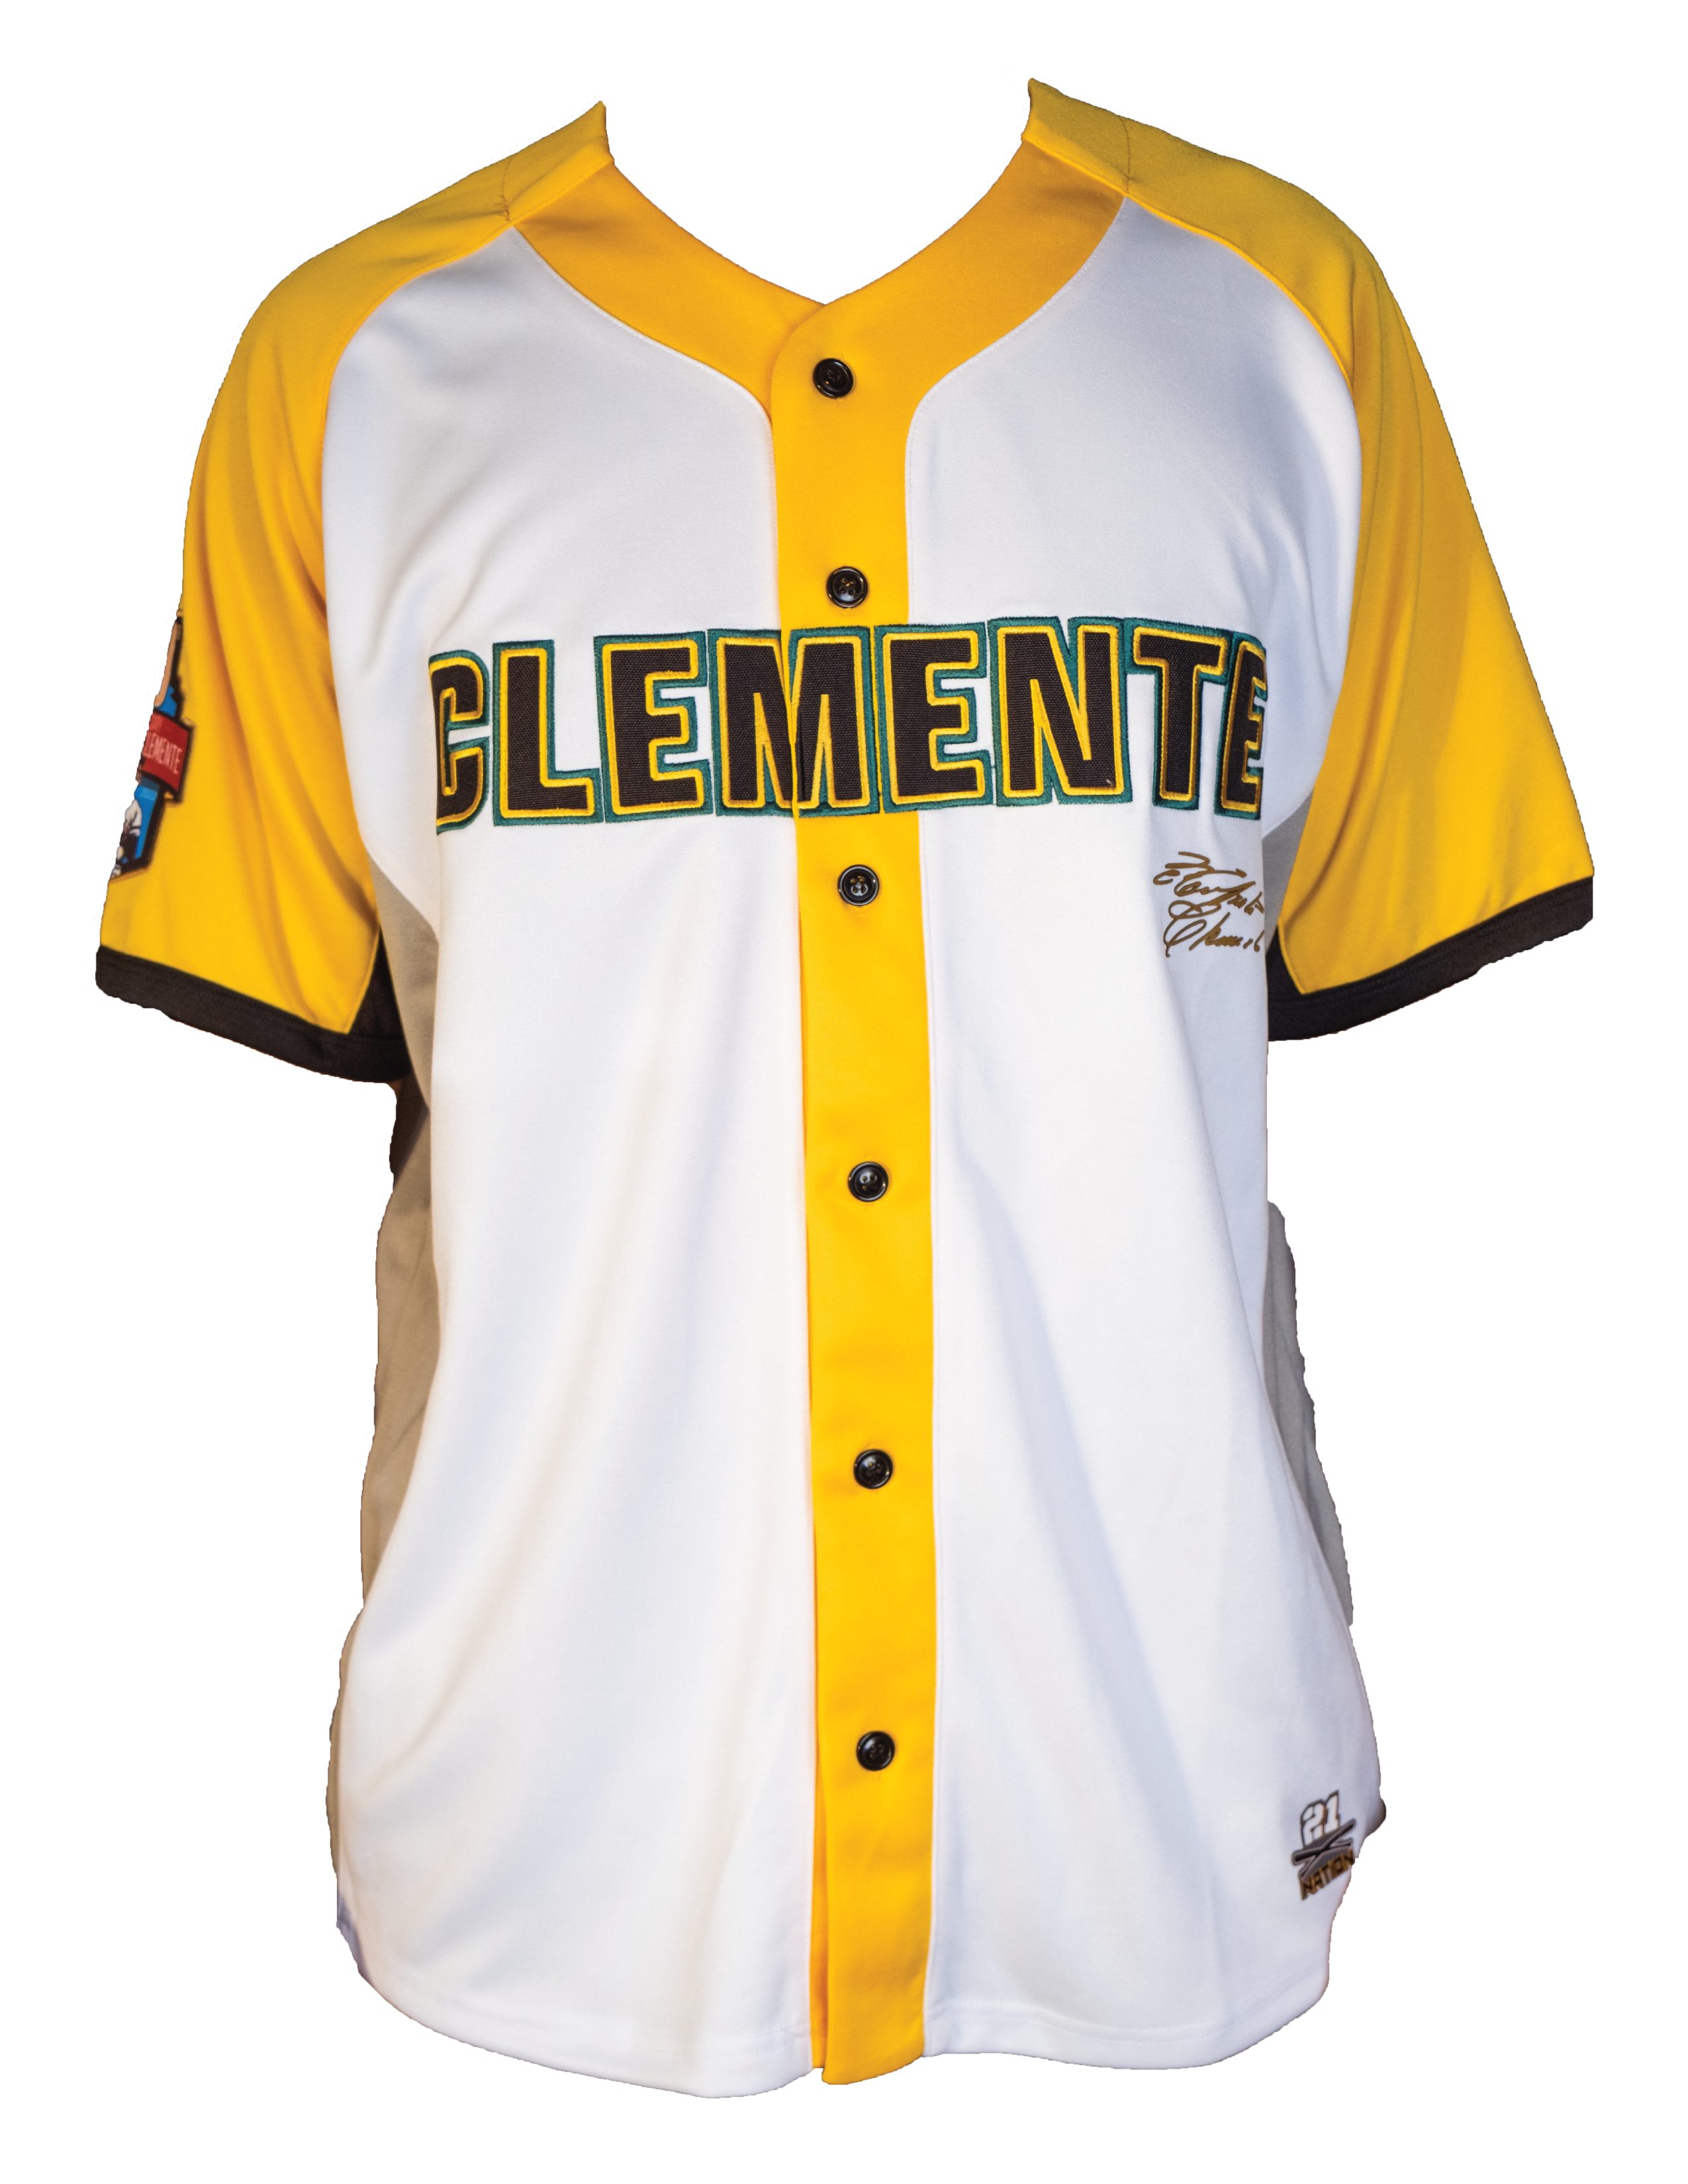 21 Roberto clemente jersey old classic style uniform Size xl new